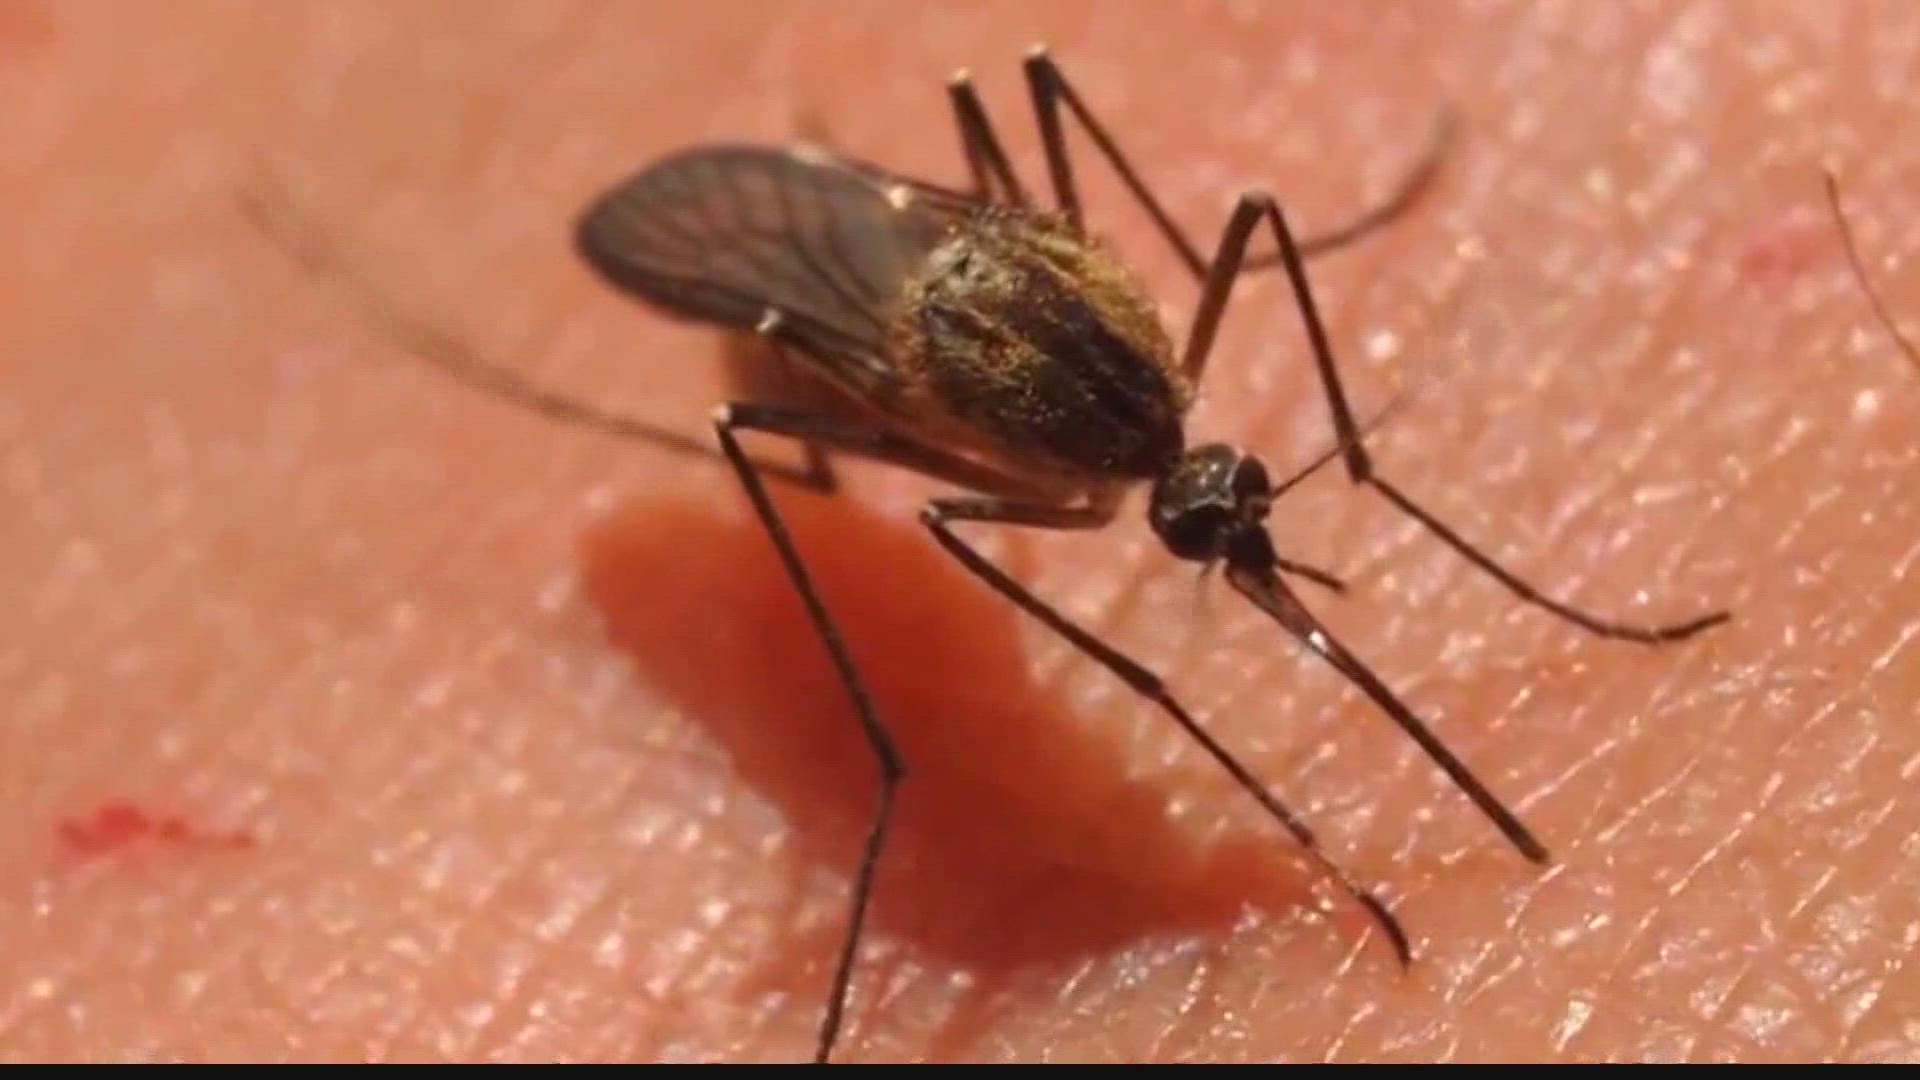 Health officials say most people infected with West Nile virus don't develop symptoms.